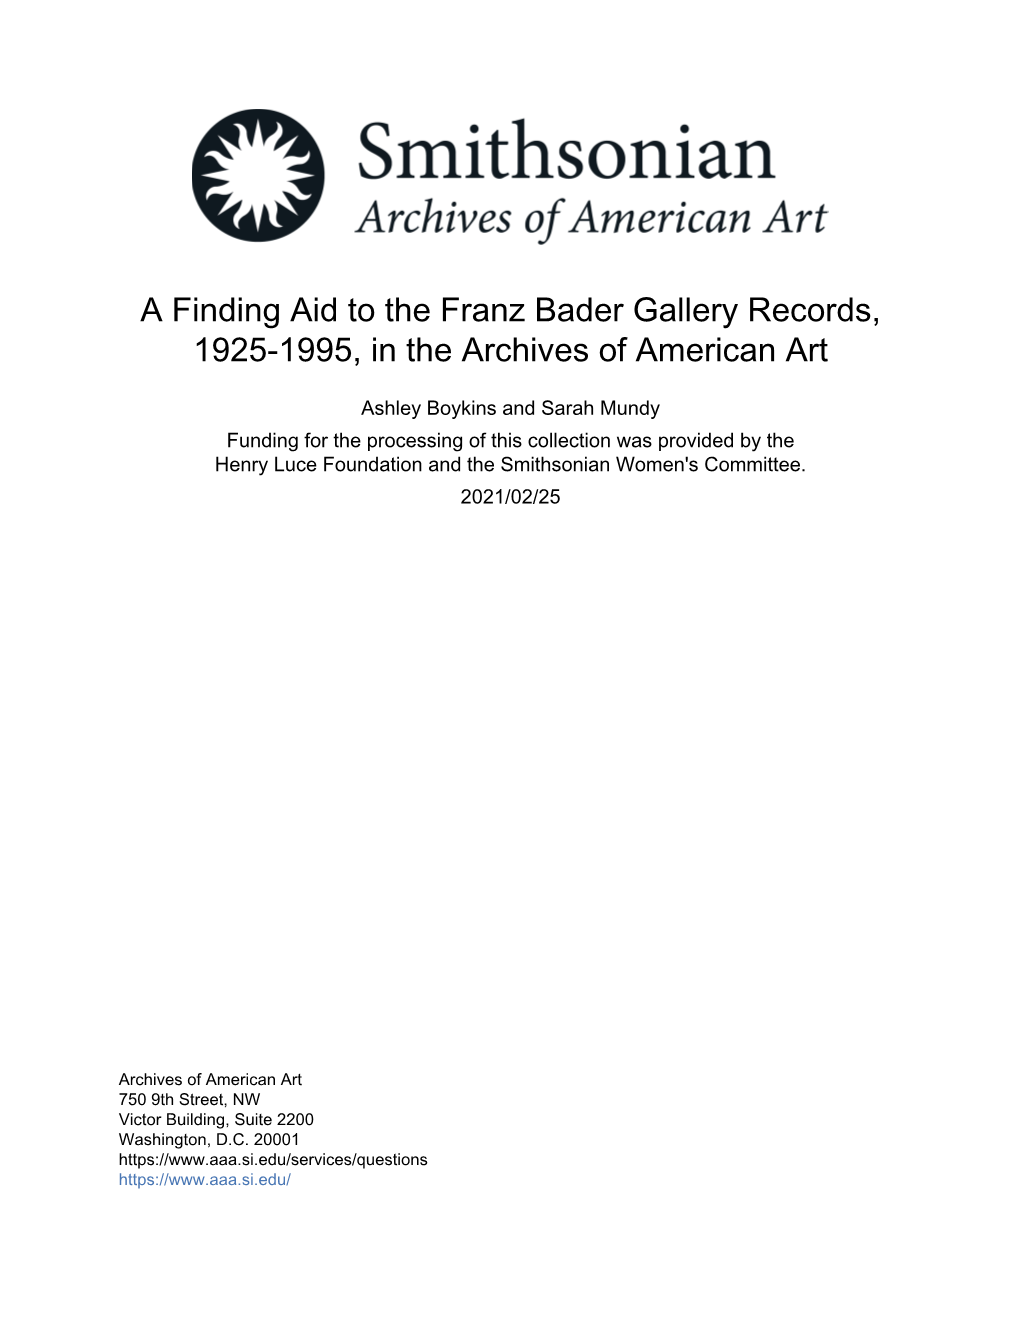 A Finding Aid to the Franz Bader Gallery Records, 1925-1995, in the Archives of American Art